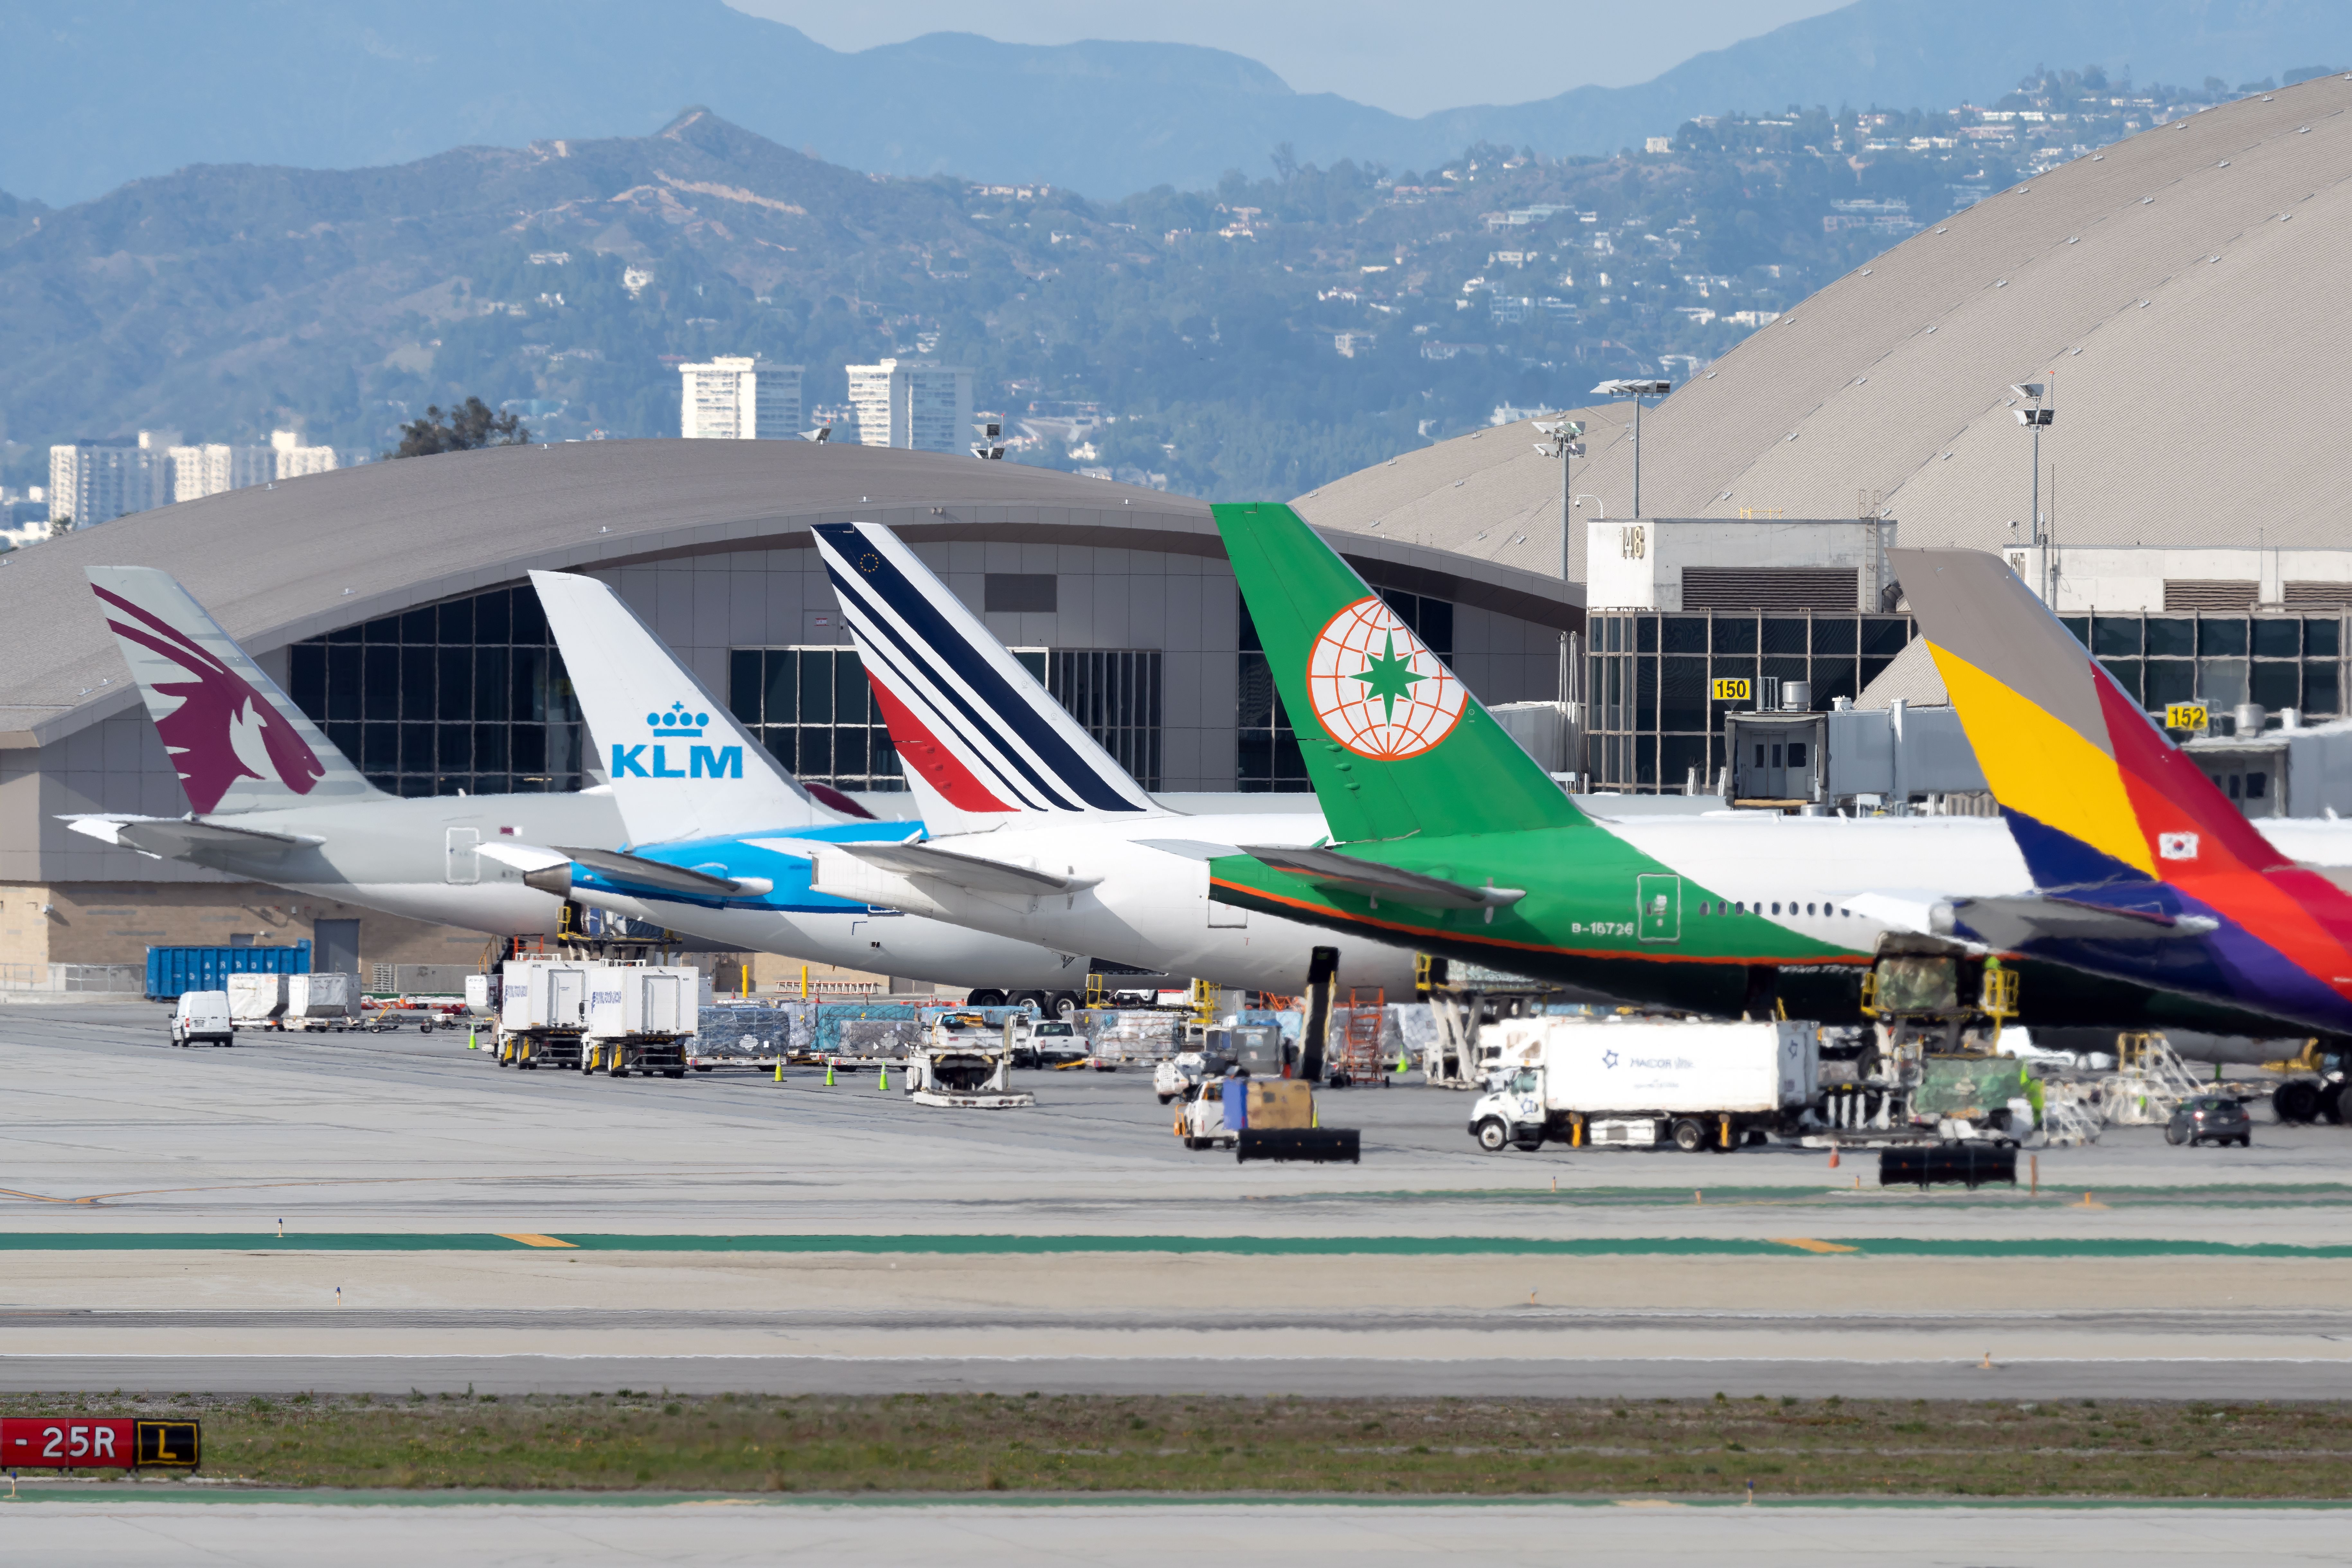 A lineup of planes from all around the globe at LAX.